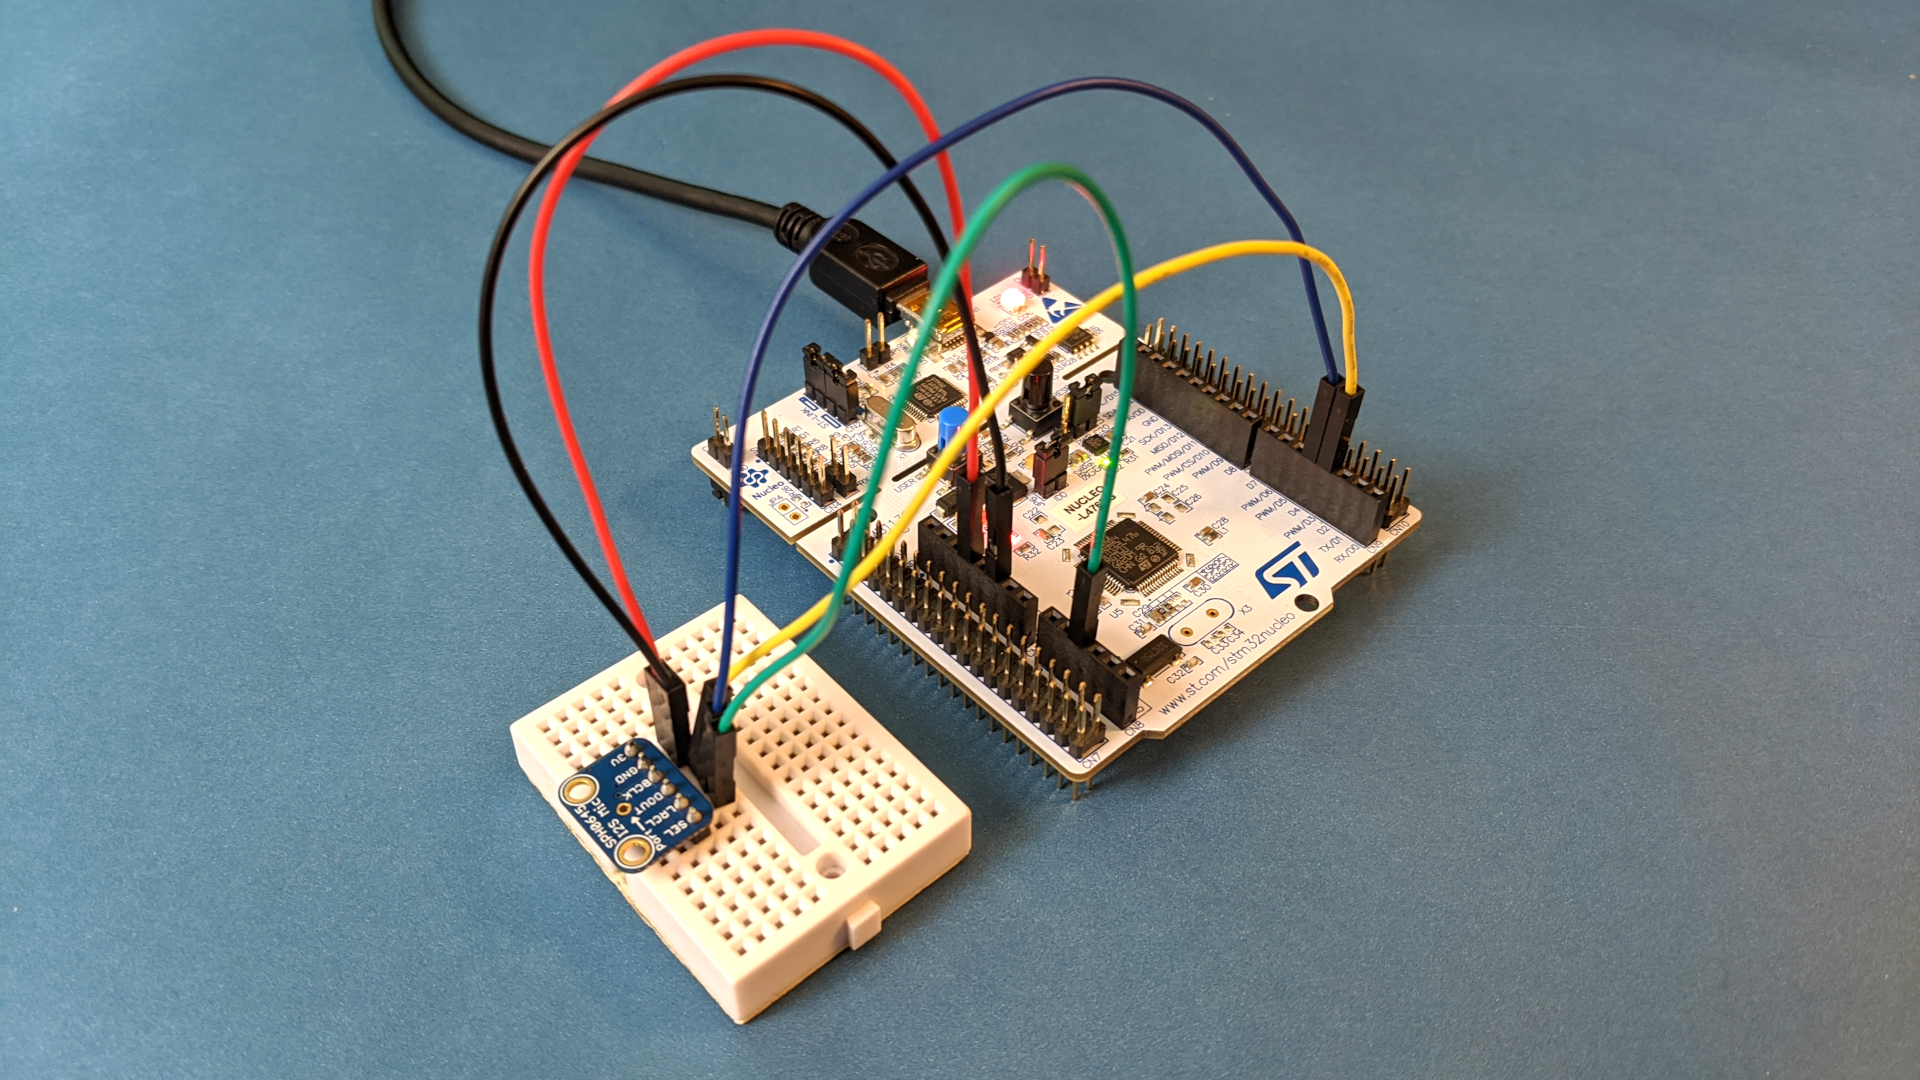 STM32 Nucleo-L476RG and MEMS microphone breakout board